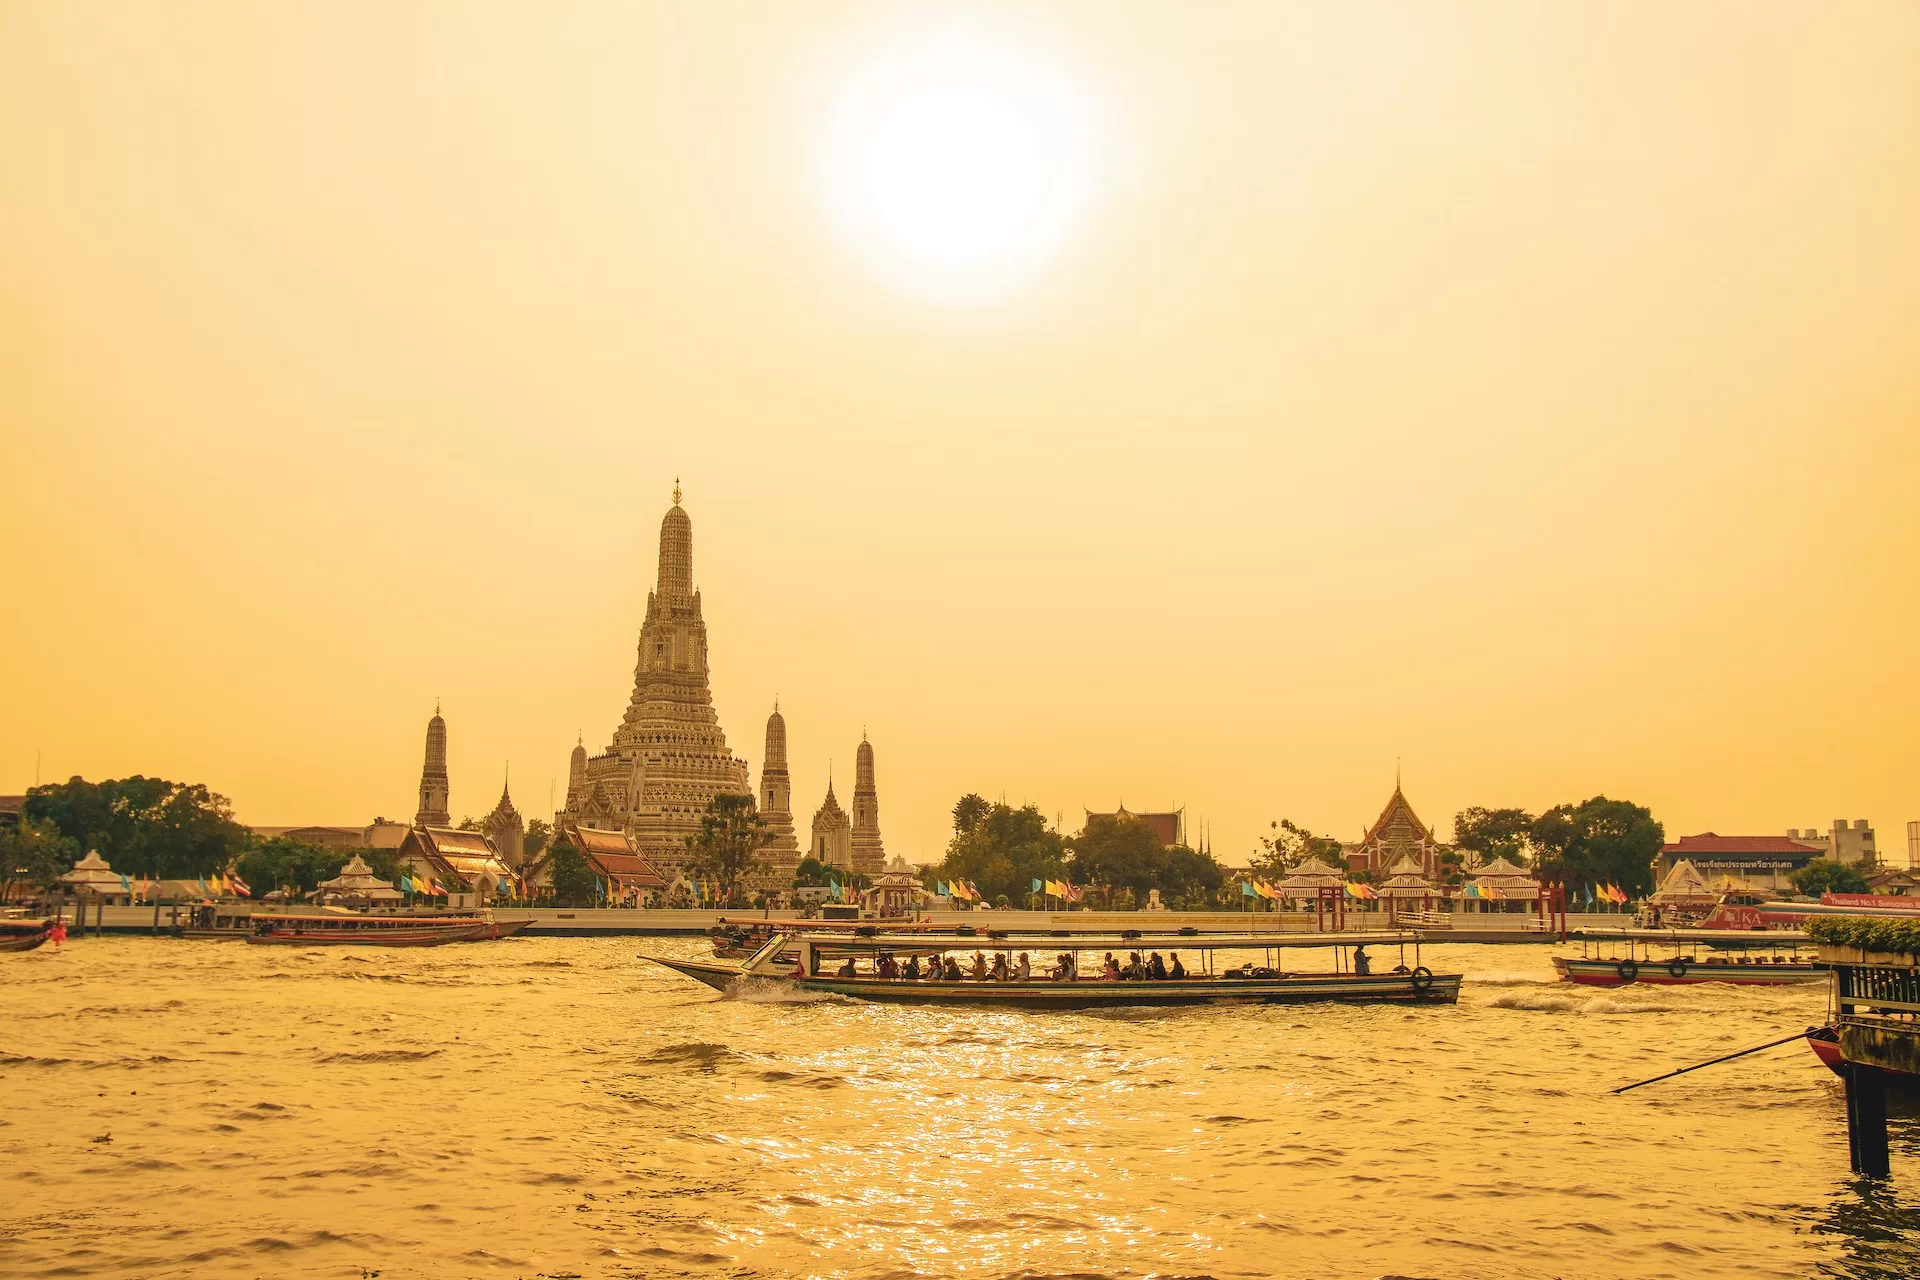 Pic of chao praya river with temple in background.